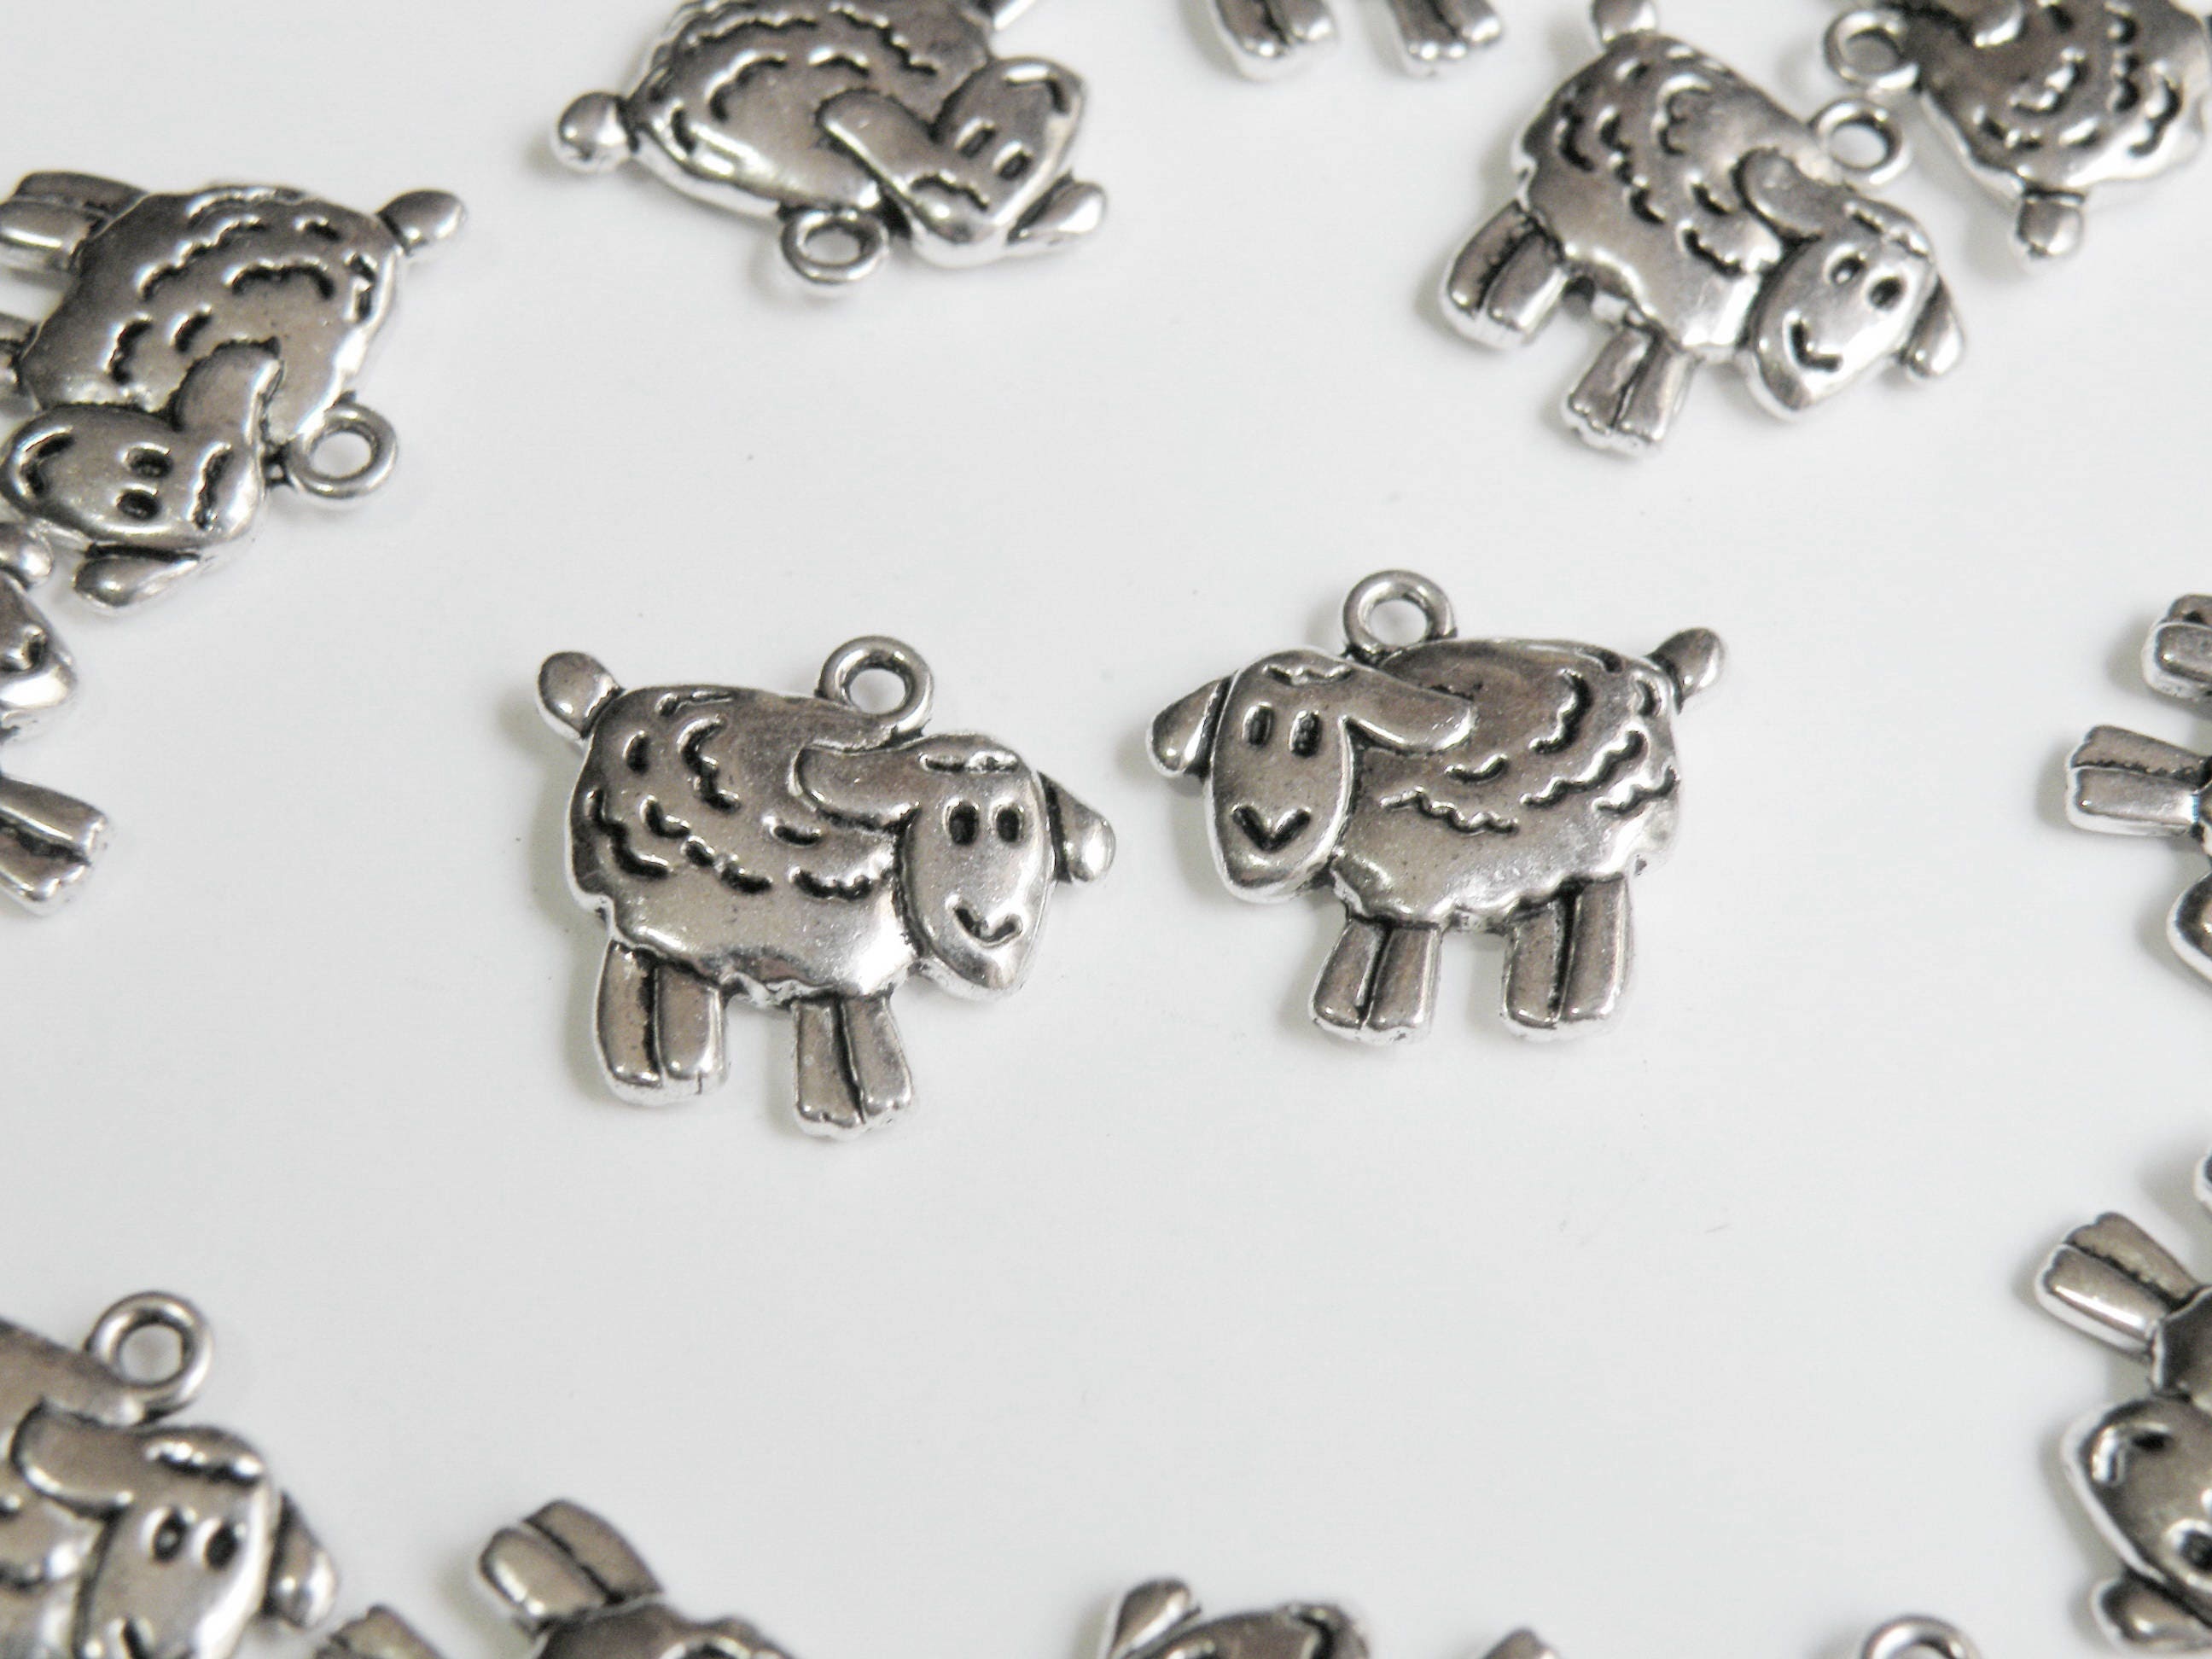 10 Sheep Charms Chinese Year Of The Goat Ram Zodiac Antique Silver 16x18mm Db37642